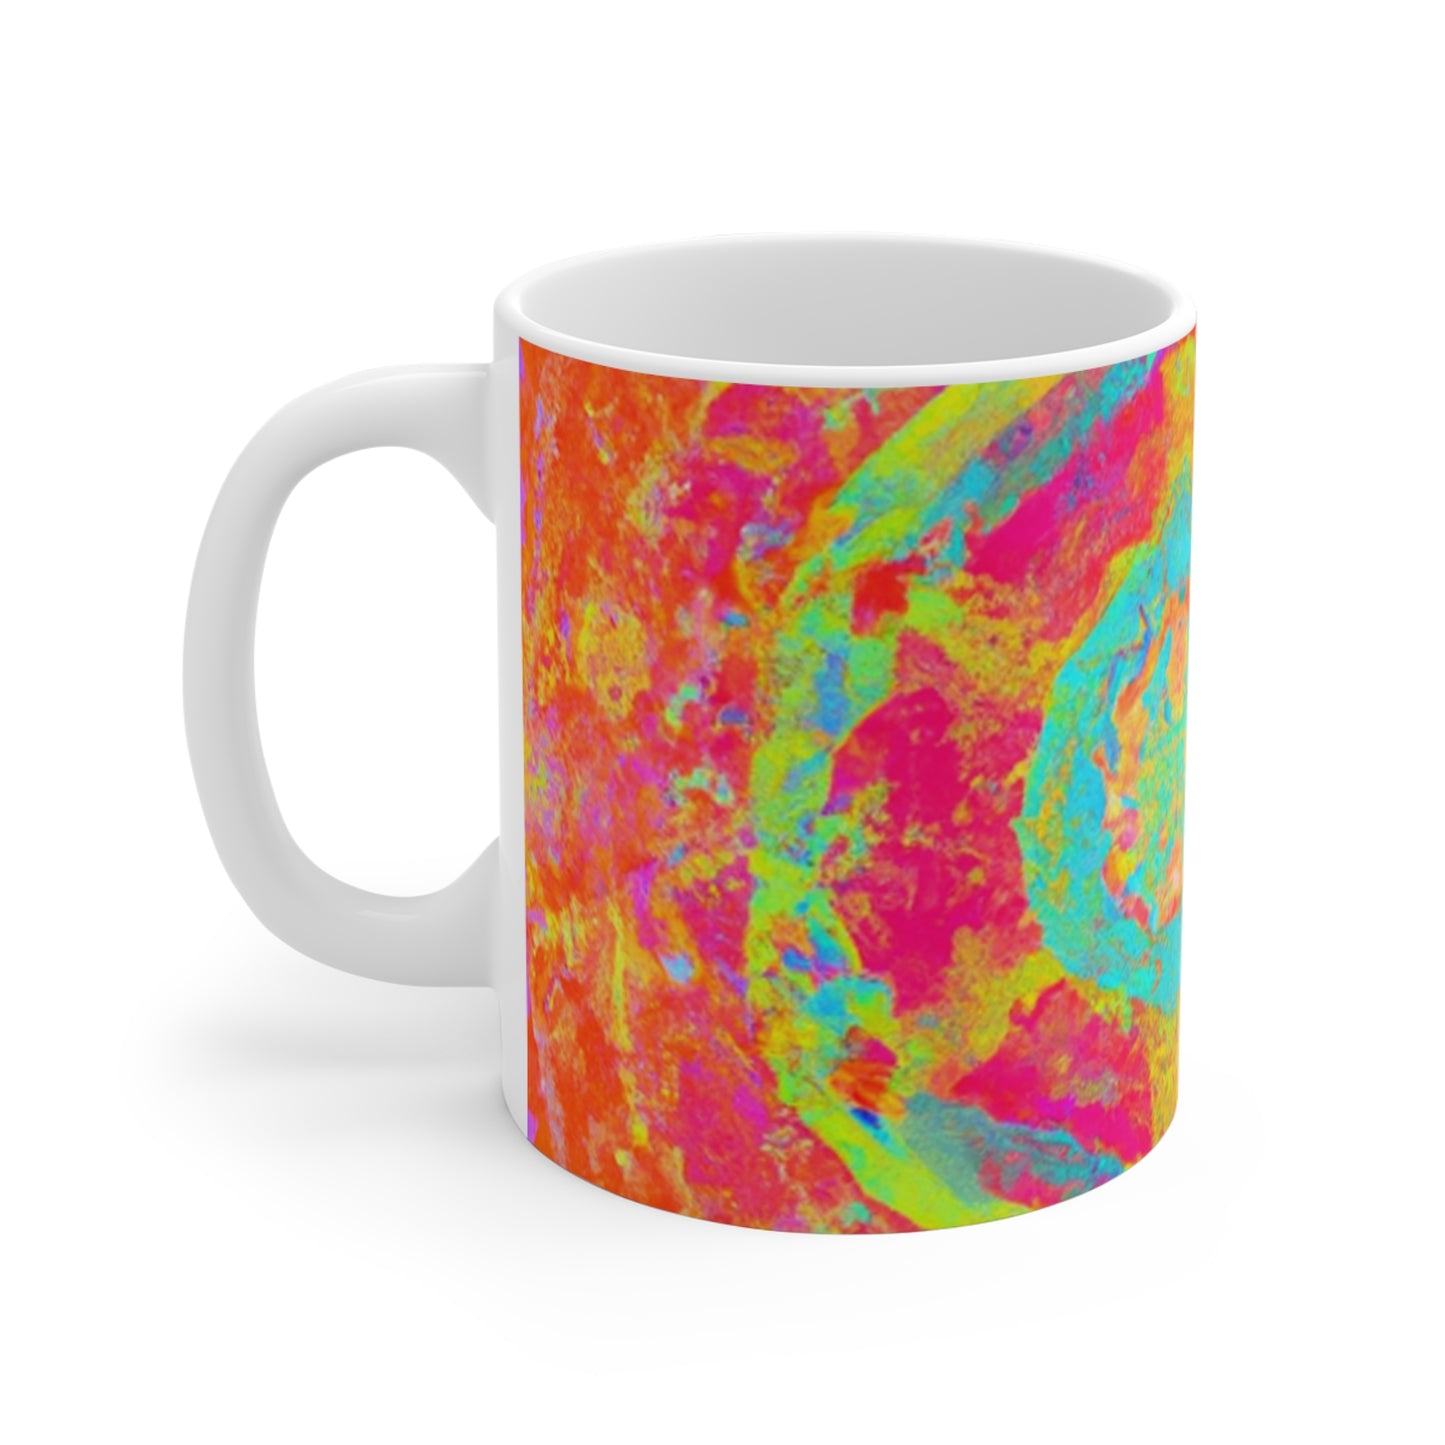 Herman's House of Java - Psychedelic Coffee Cup Mug 11 Ounce